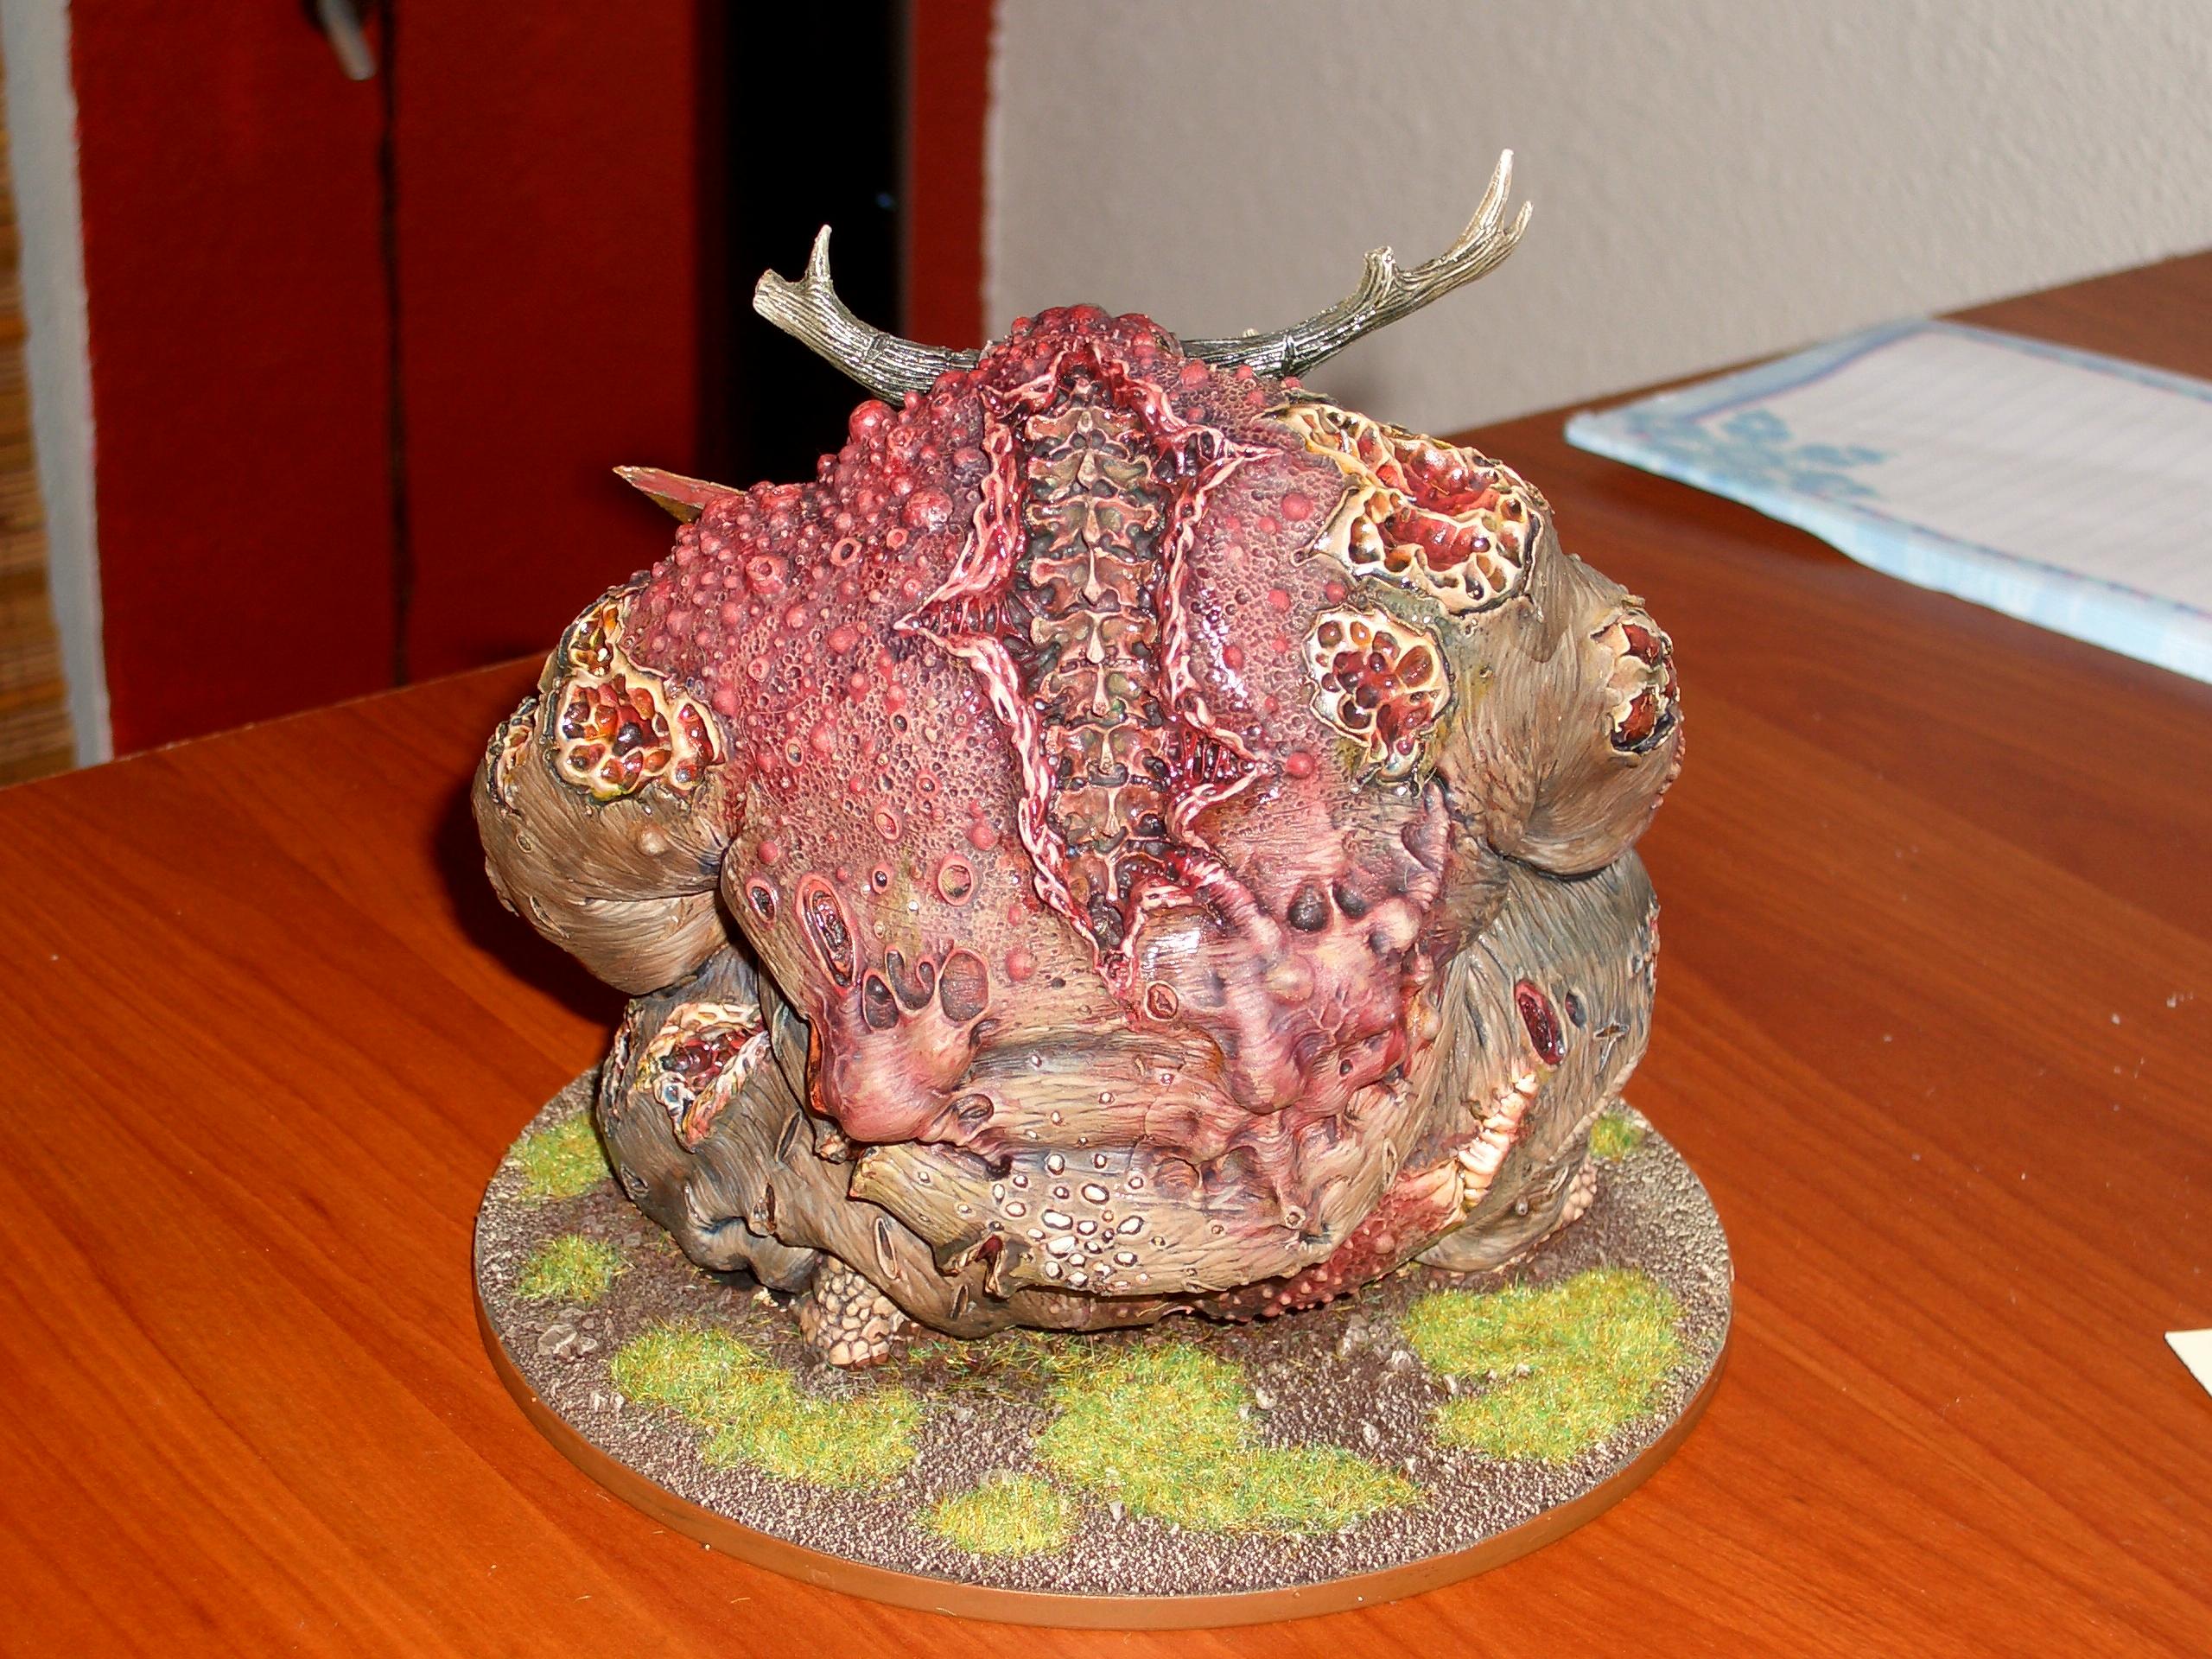 Daemons, Forge World, Great Unclean One, Nurgle